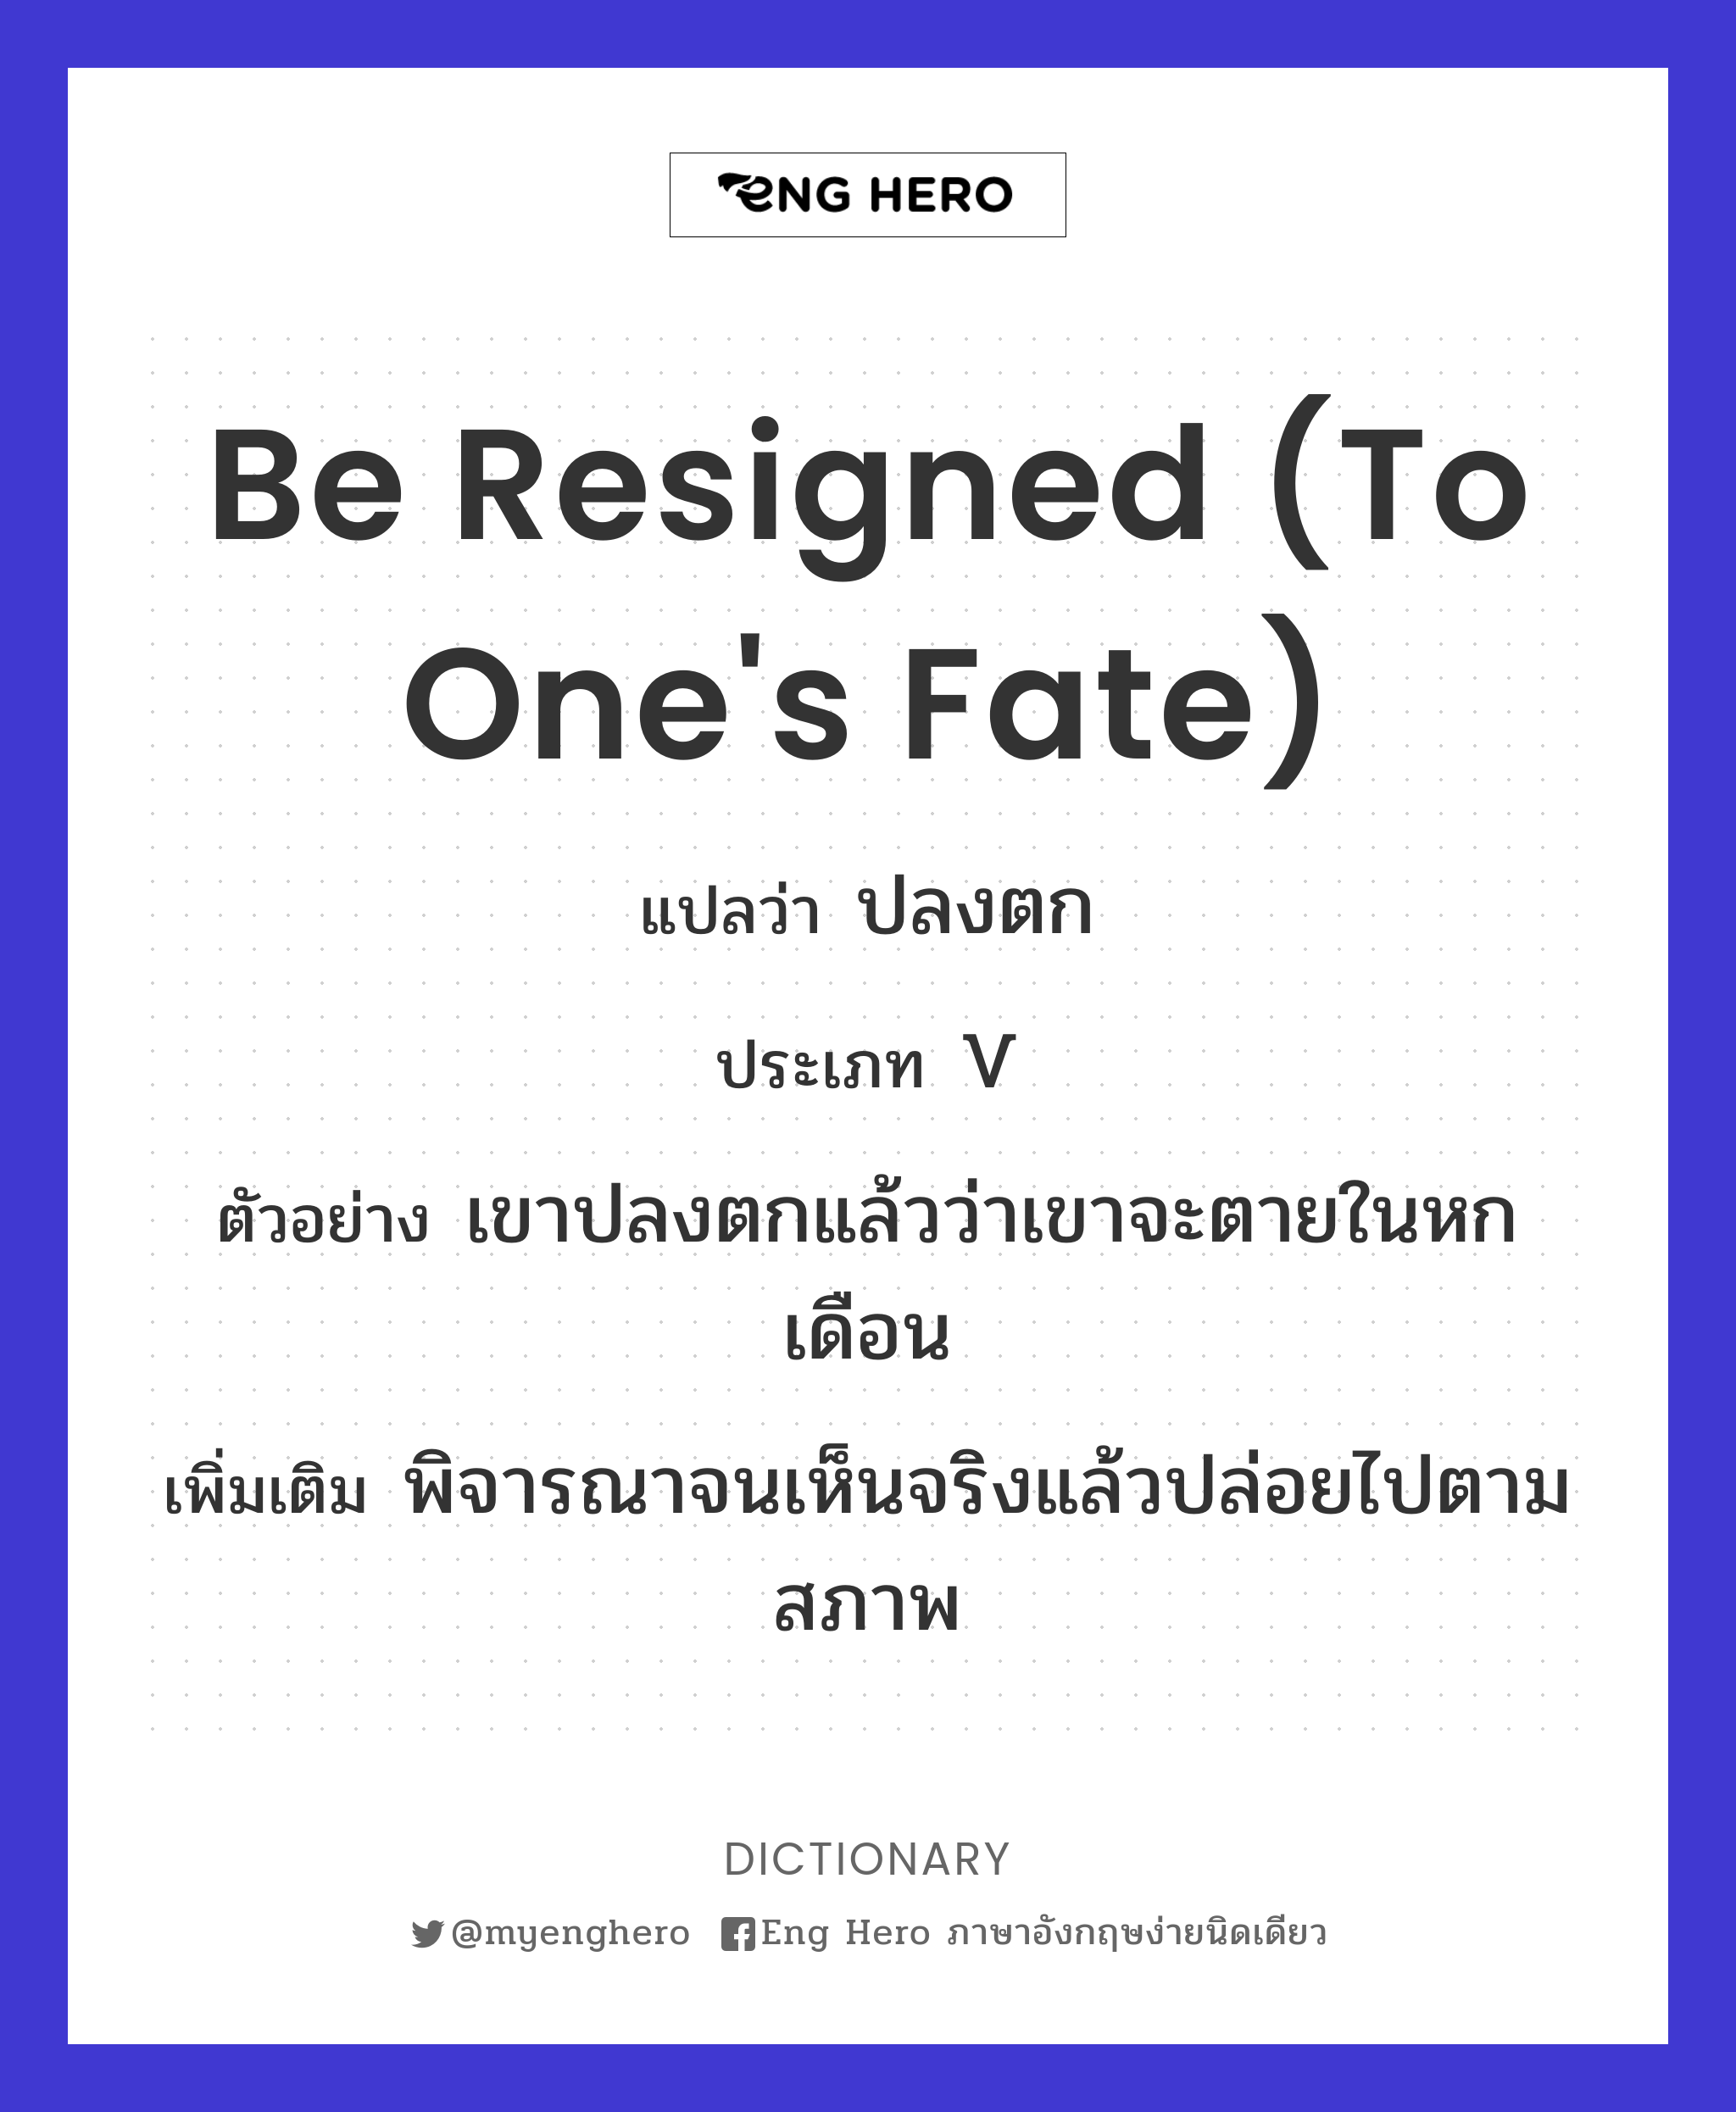 be resigned (to one's fate)